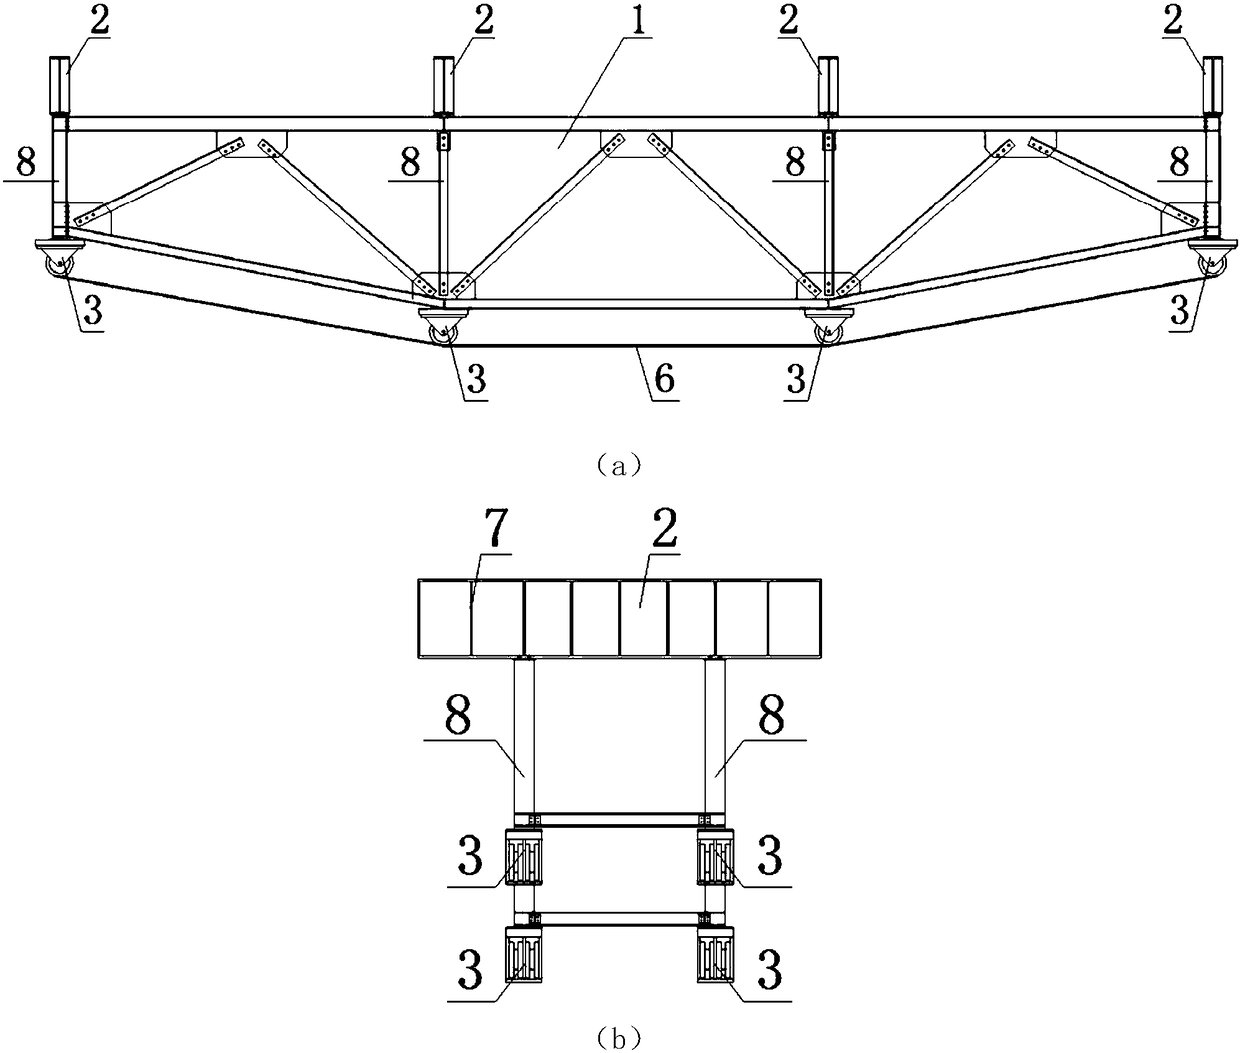 Variable height cable-truss bridge reinforcement structure system